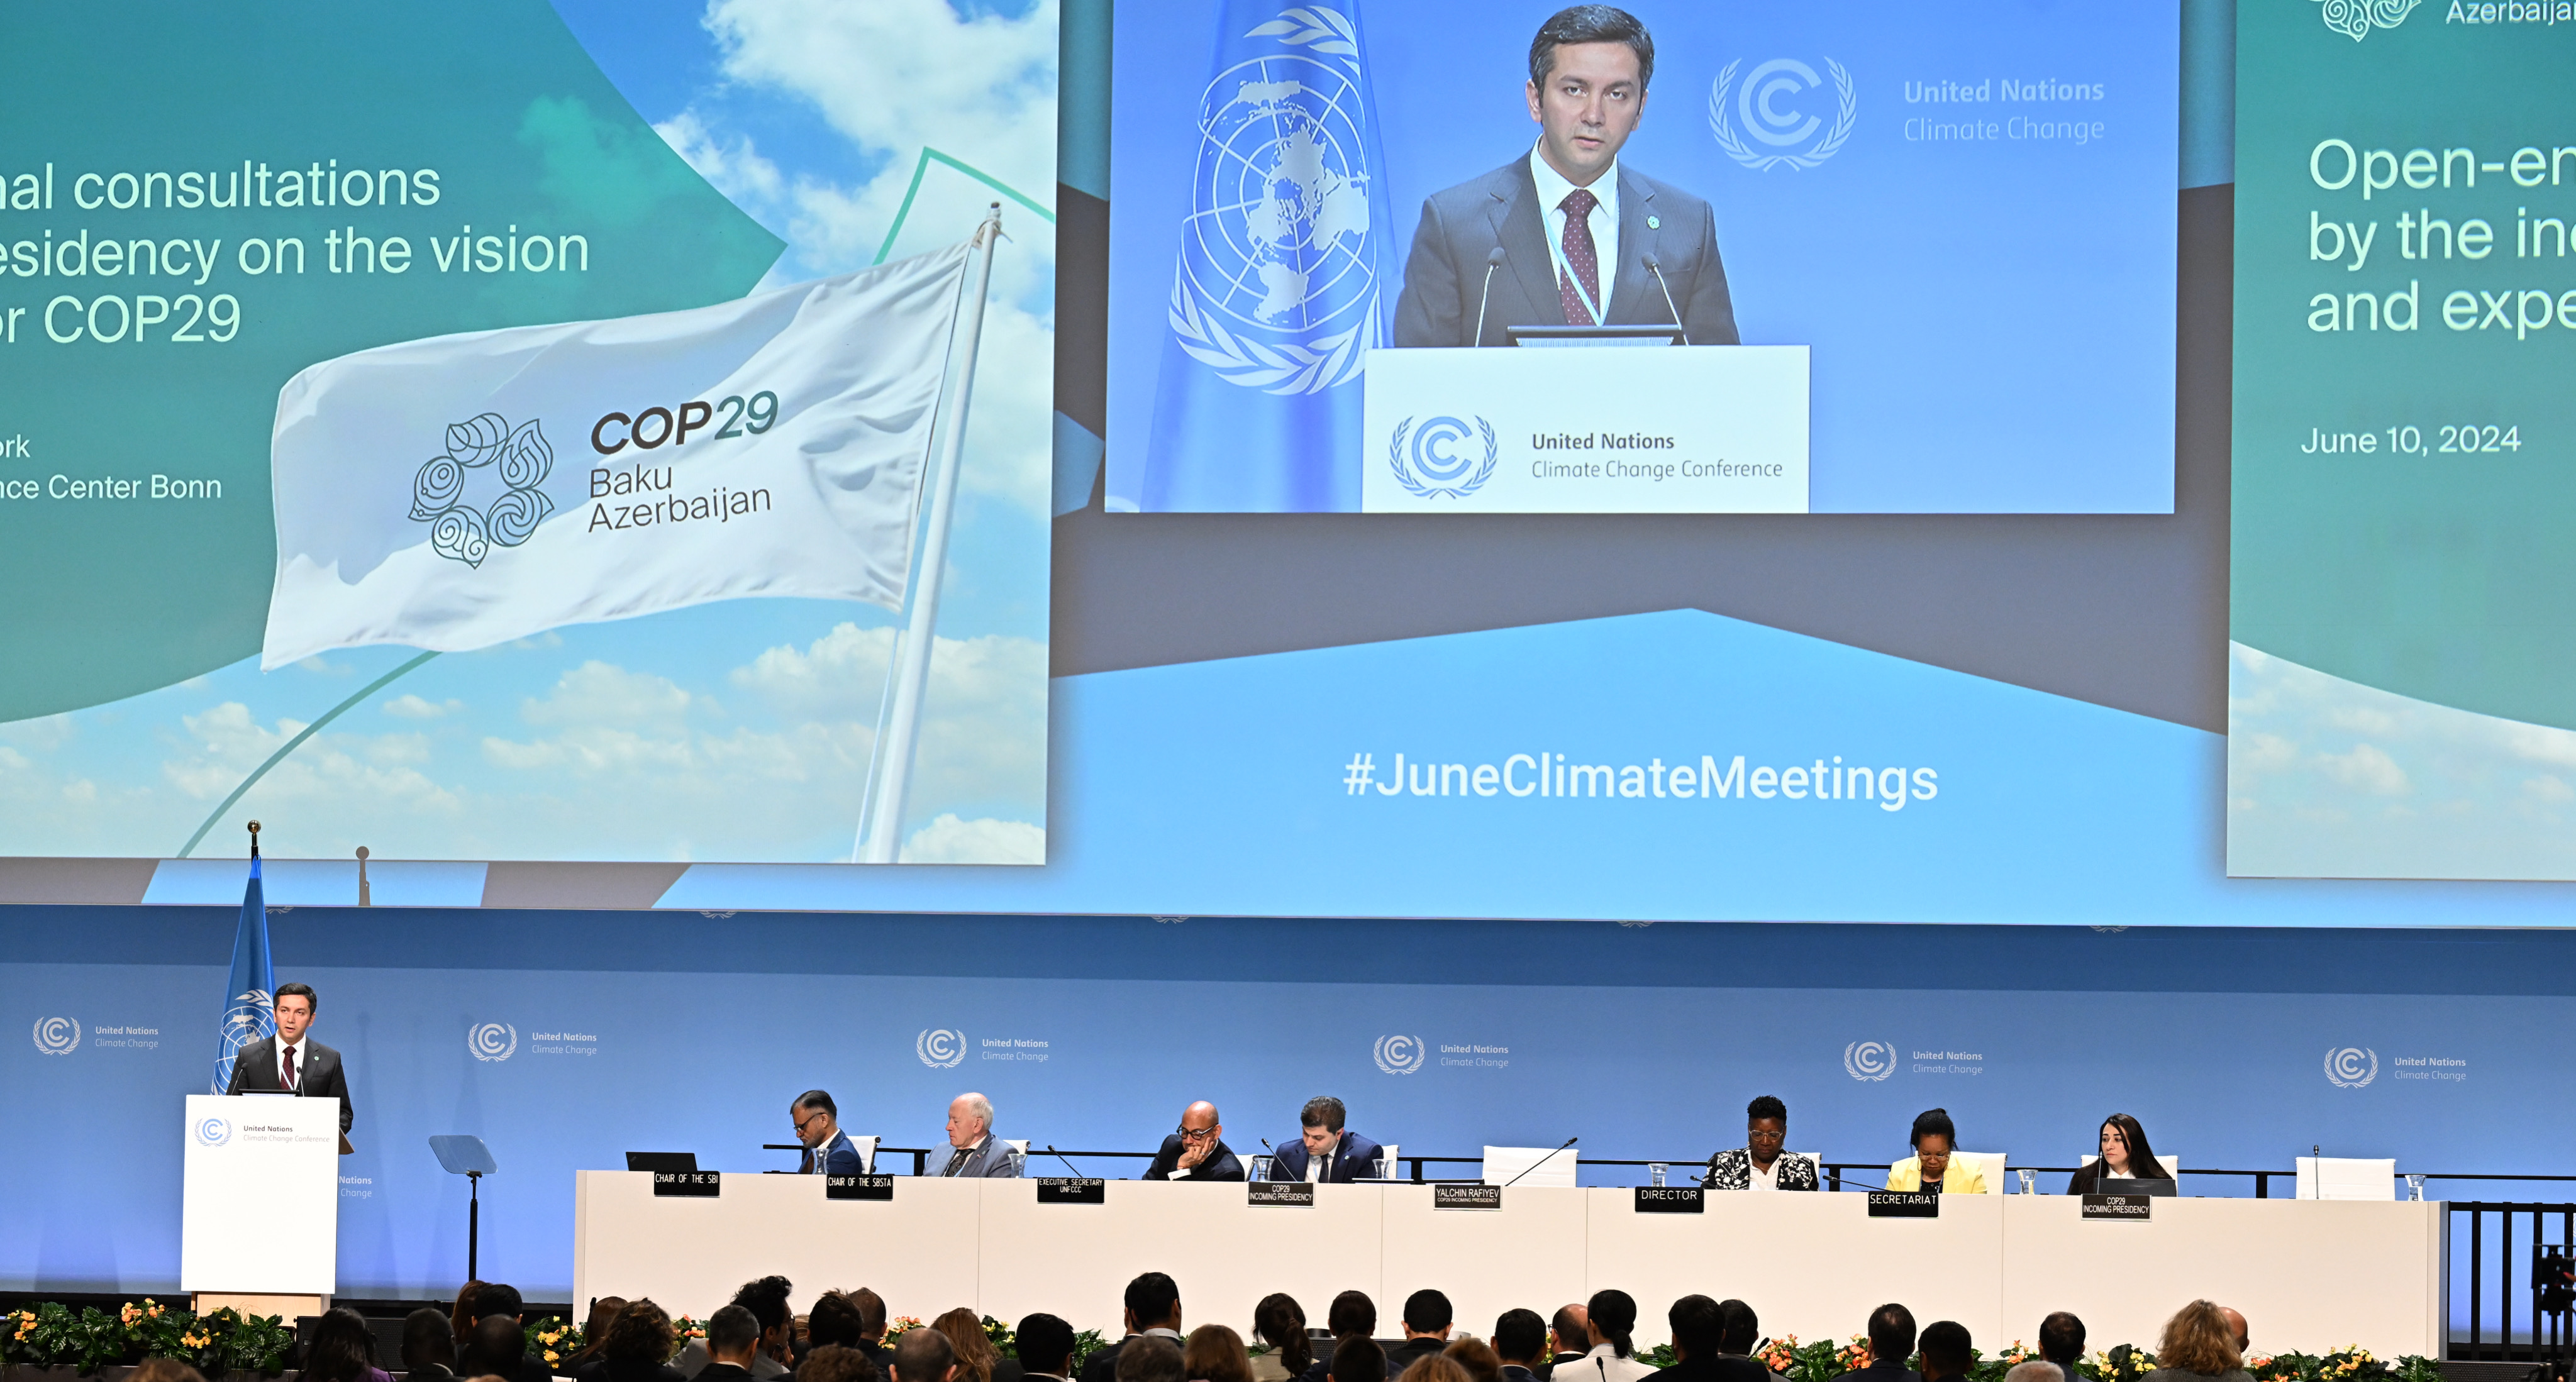 COP29 Lead Negotiator Outlines Vision and Strategy for Success for Climate Diplomacy